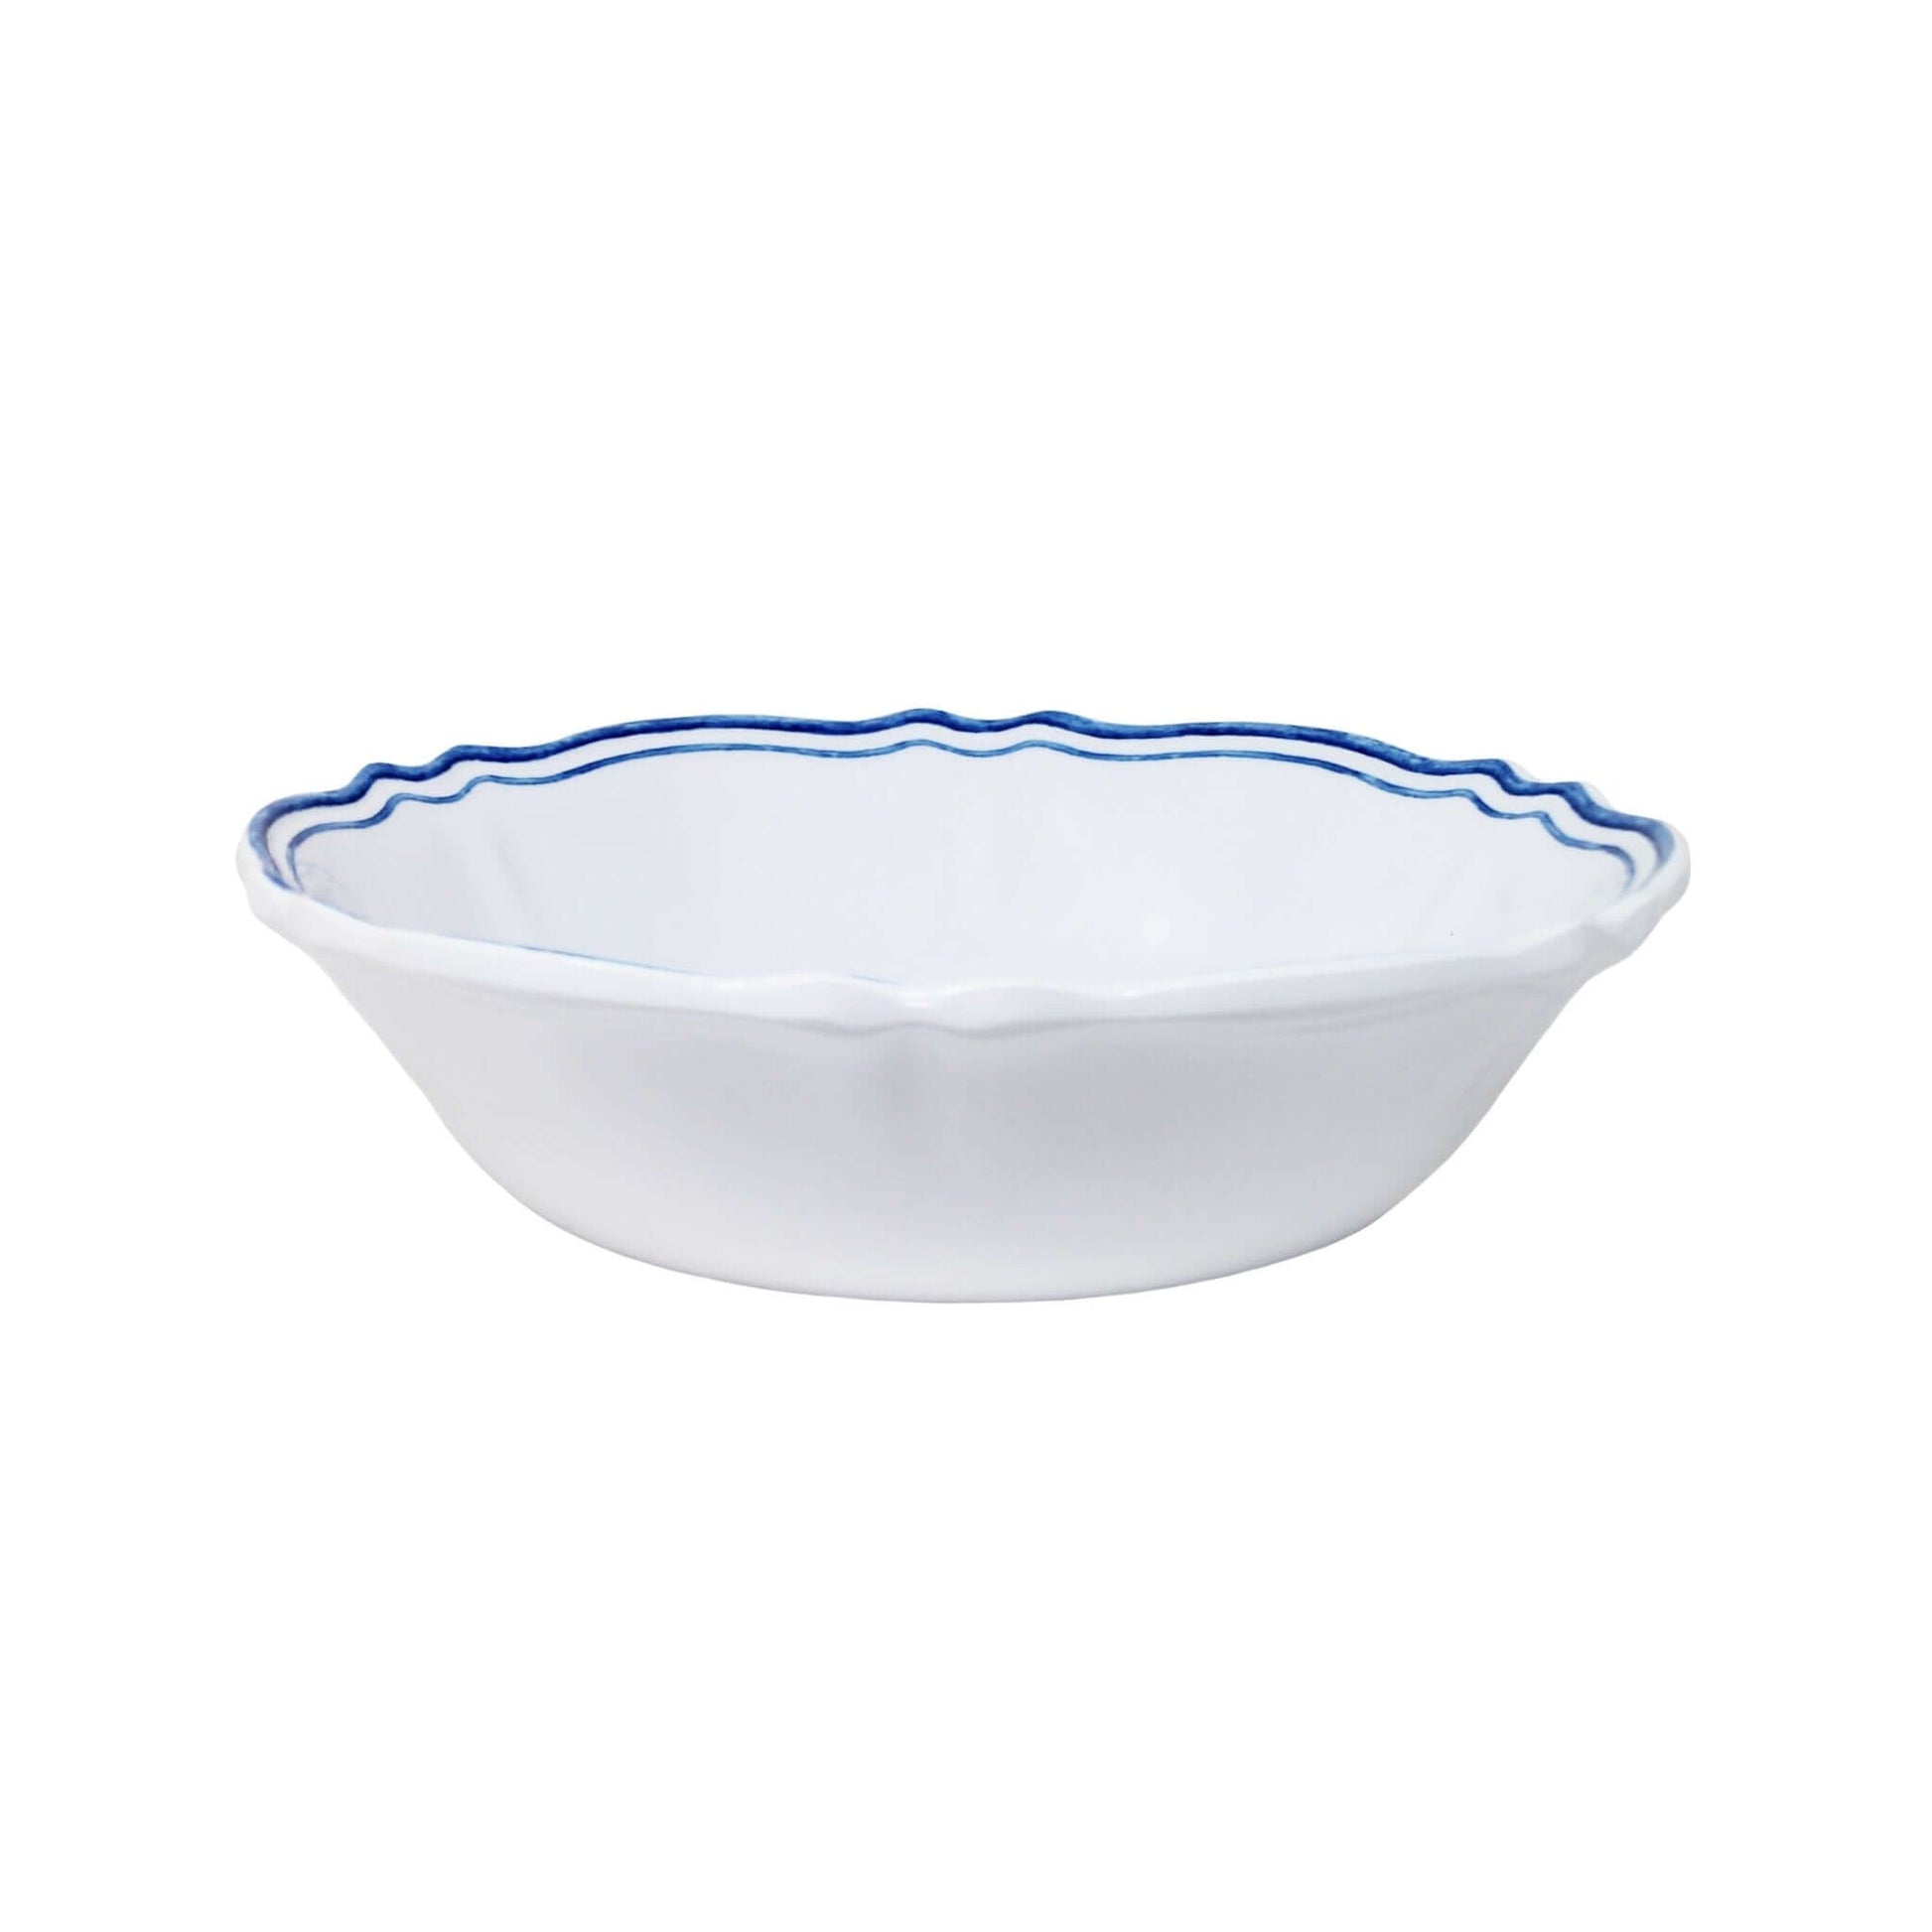 Maison Cereal Bowl - Royalties